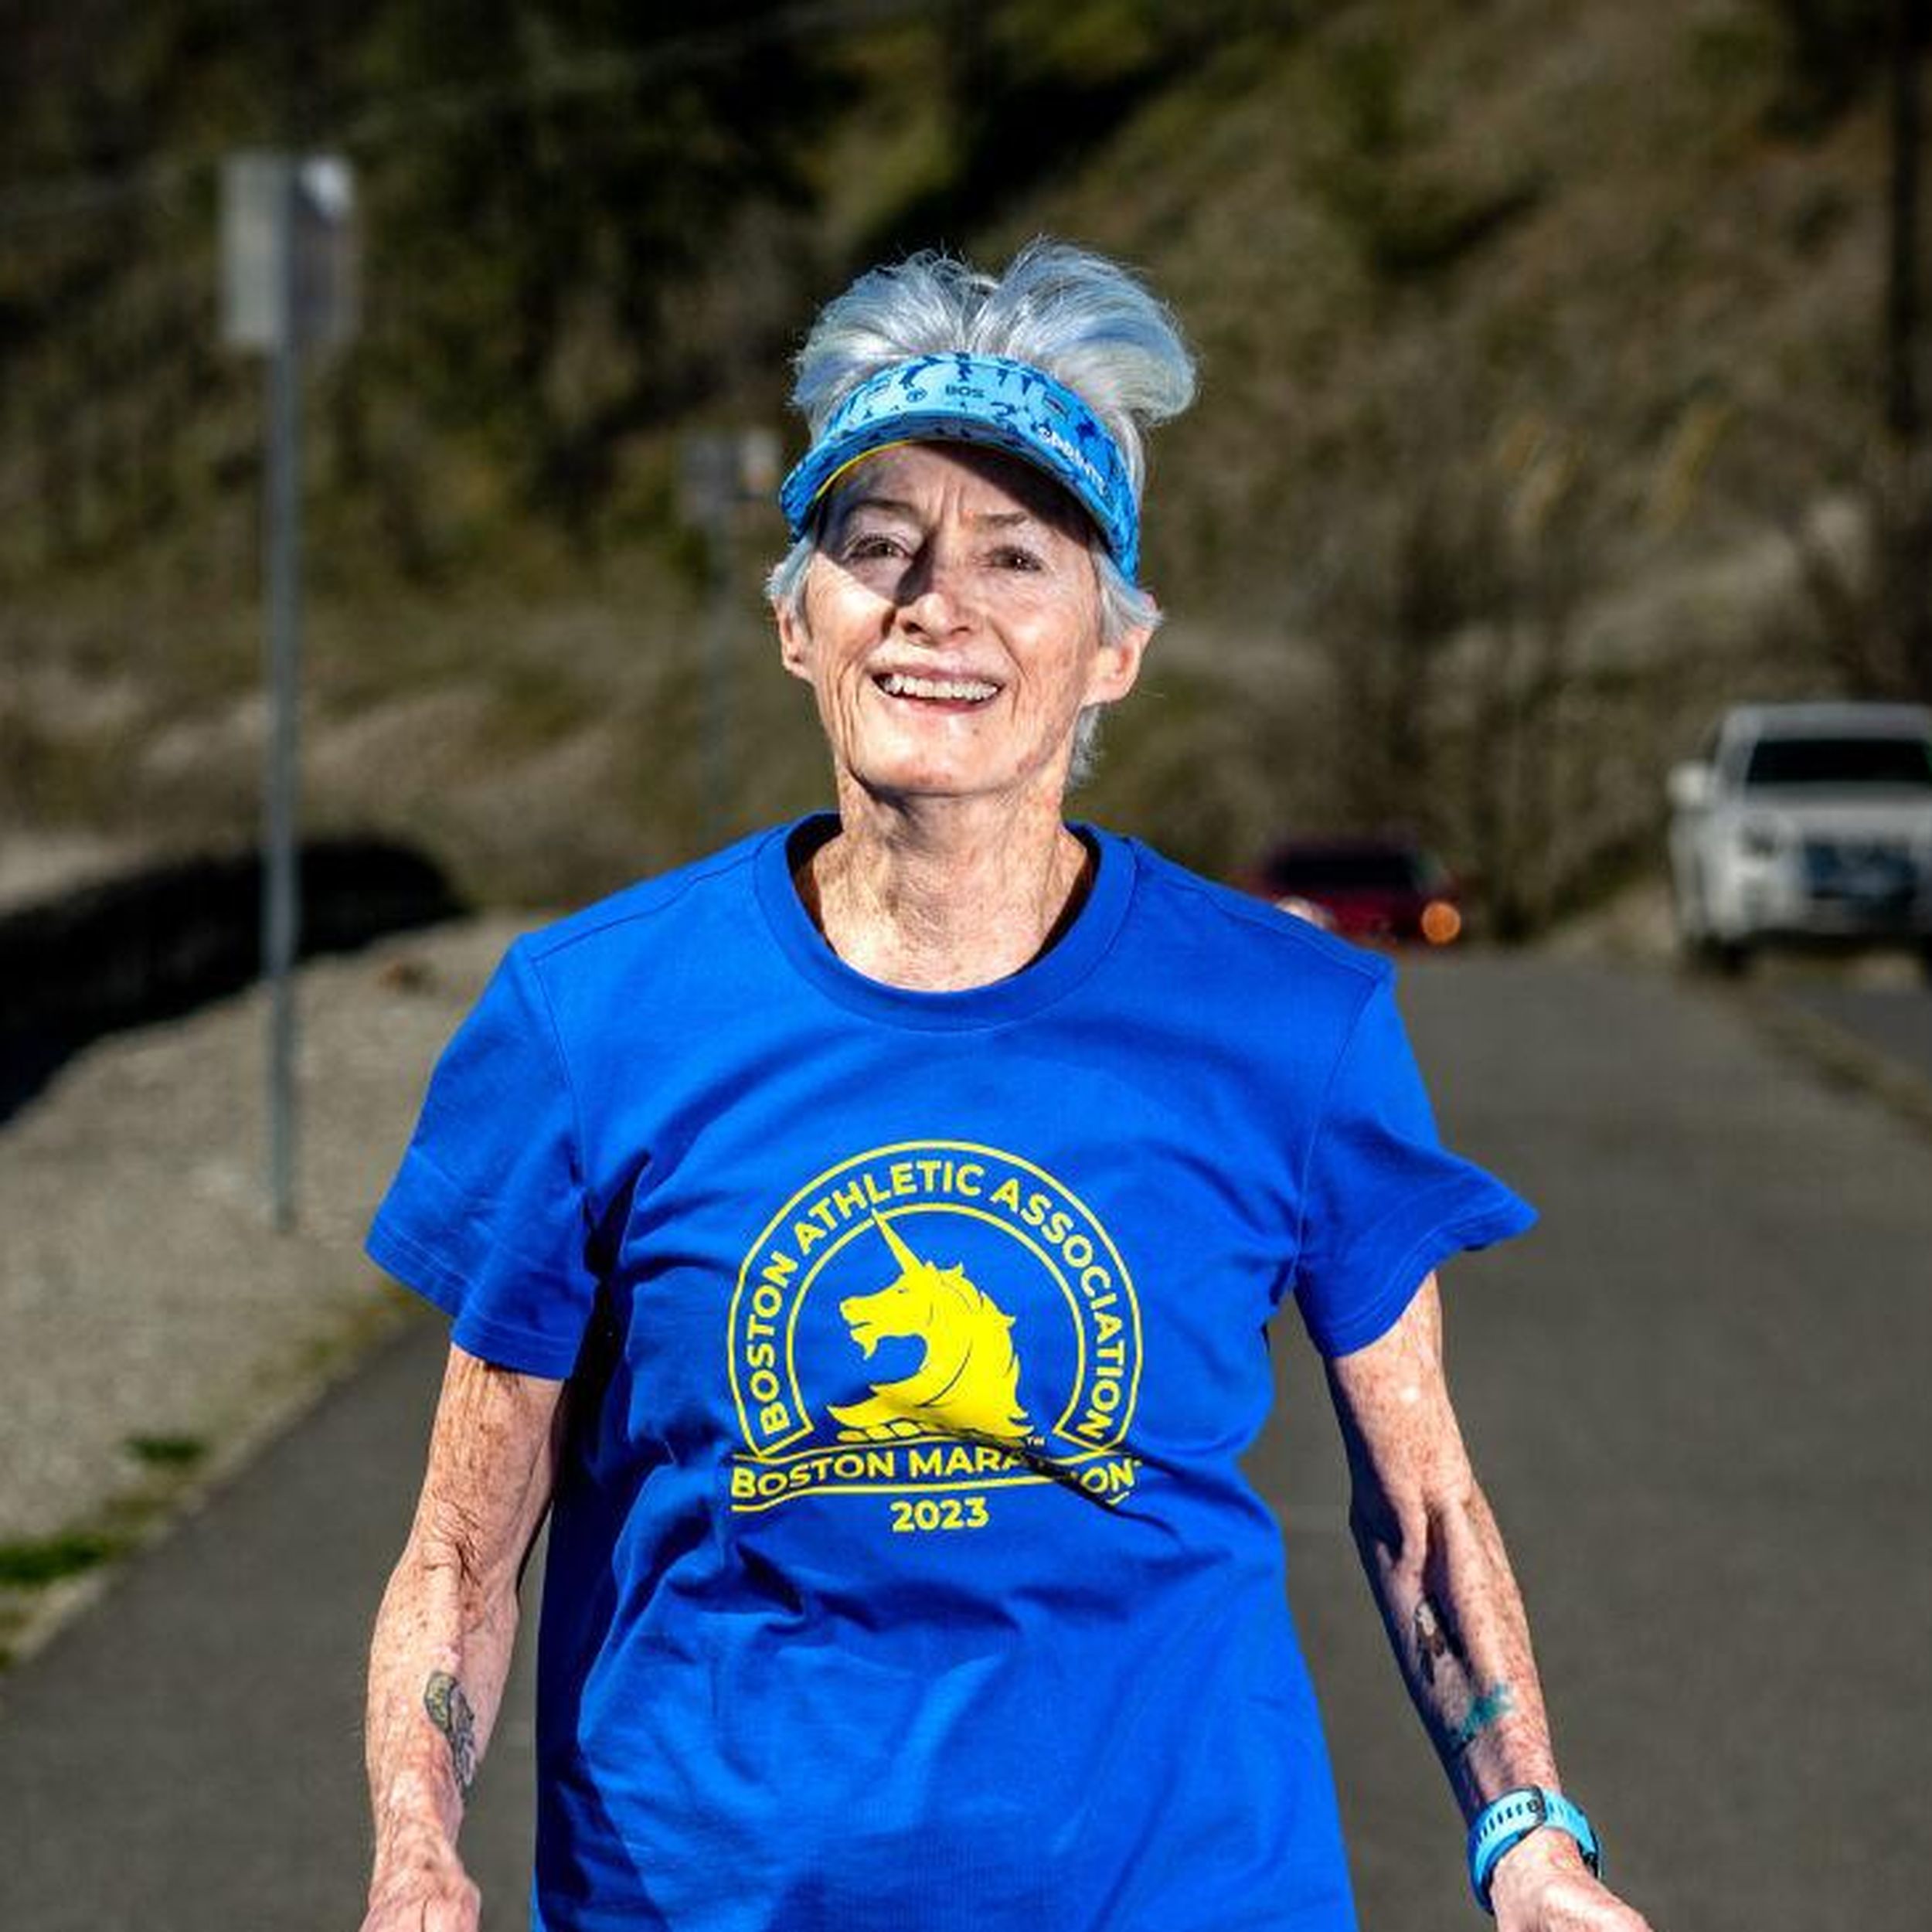 Bloomsday is all about enjoying it': After conquering injuries and